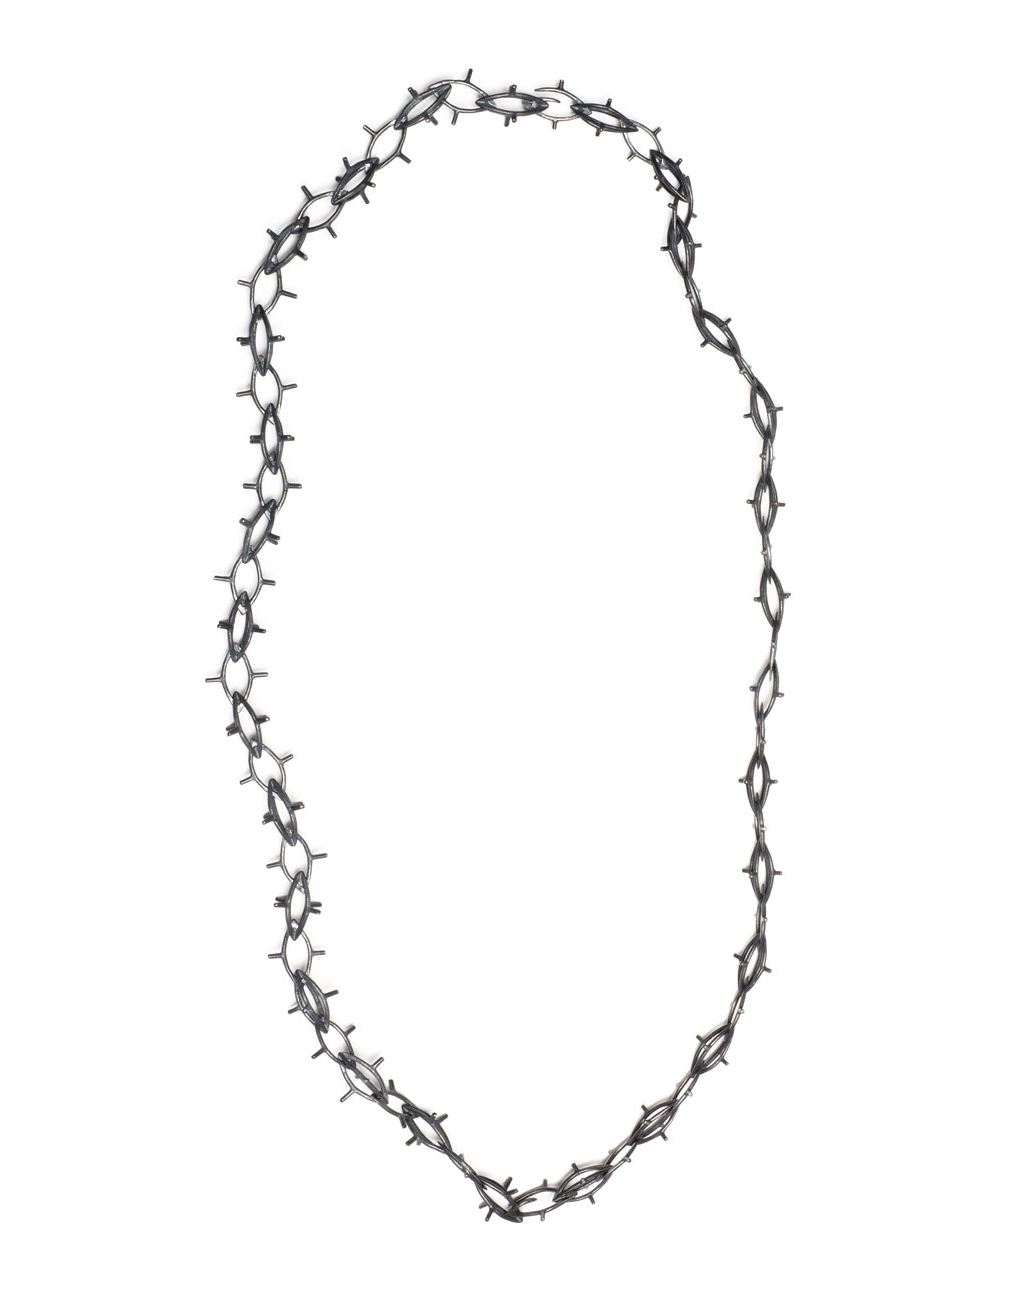 Winfried Krüger, untitled, 1997, necklace, ring; oxidised silver, stones, 150 x 150 mm, 50 x 25 mm, €1940 (image 1 of 2 - necklace)